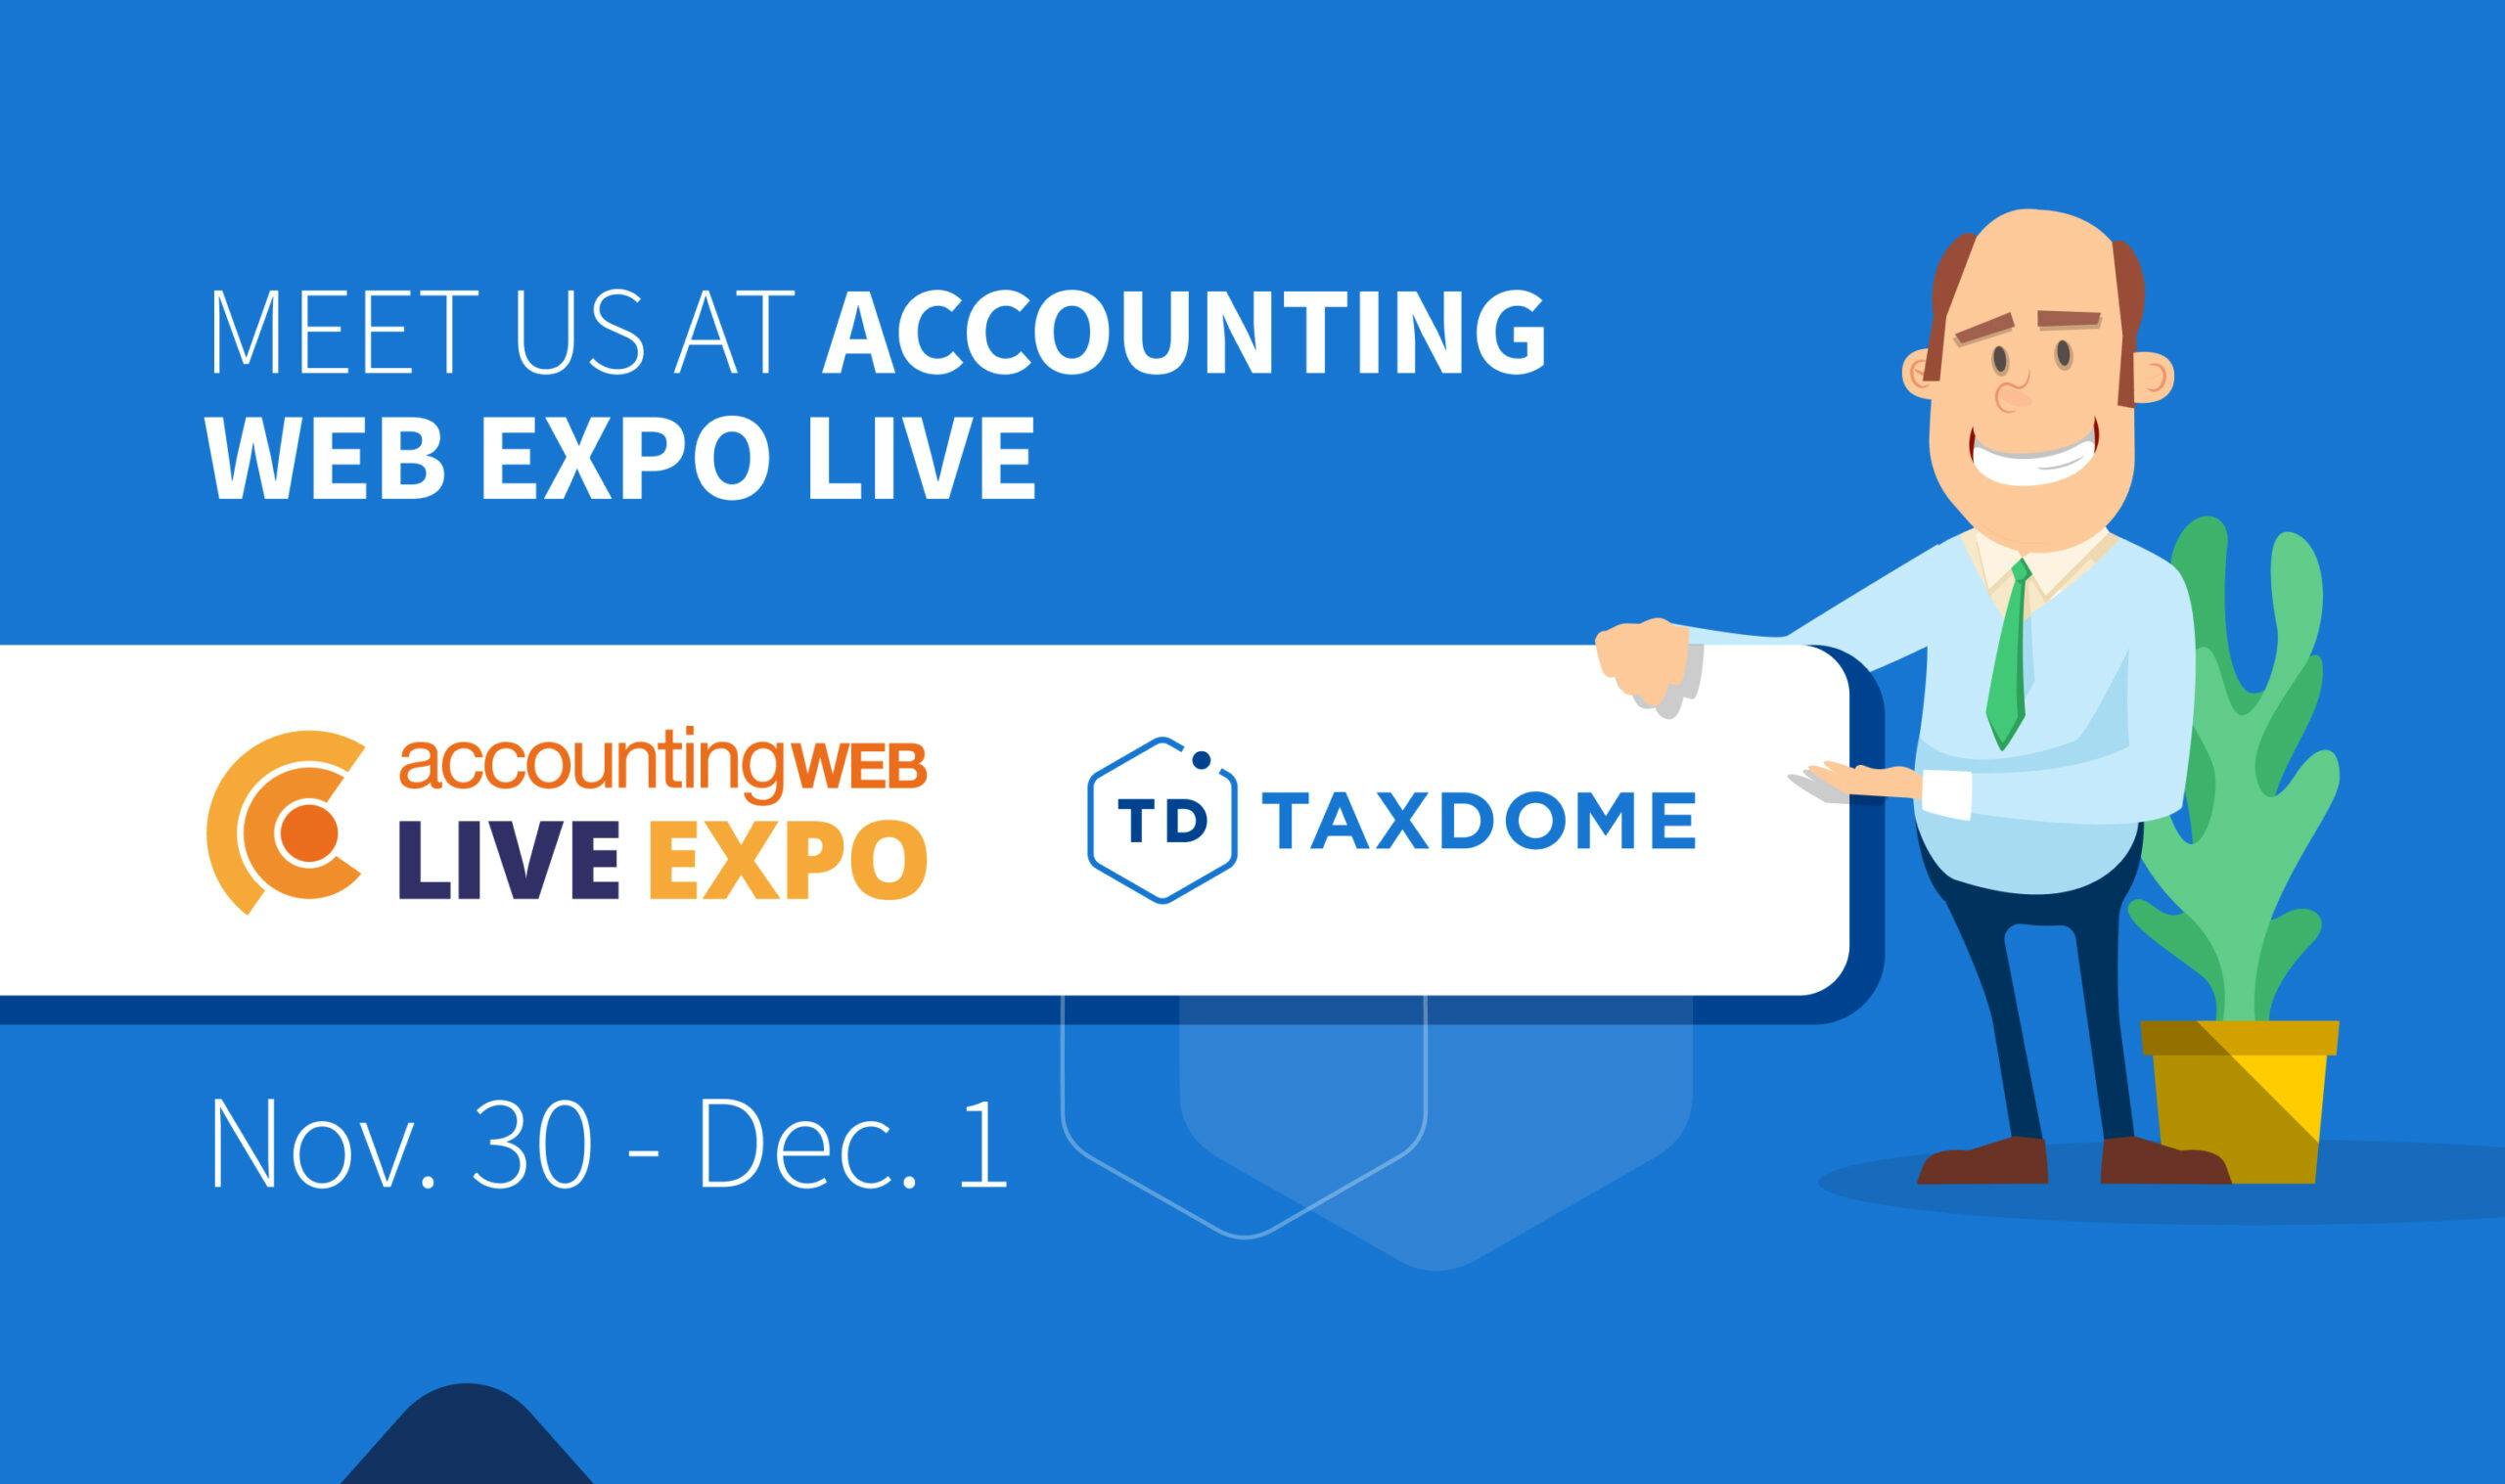 Accounting Web Live Expo